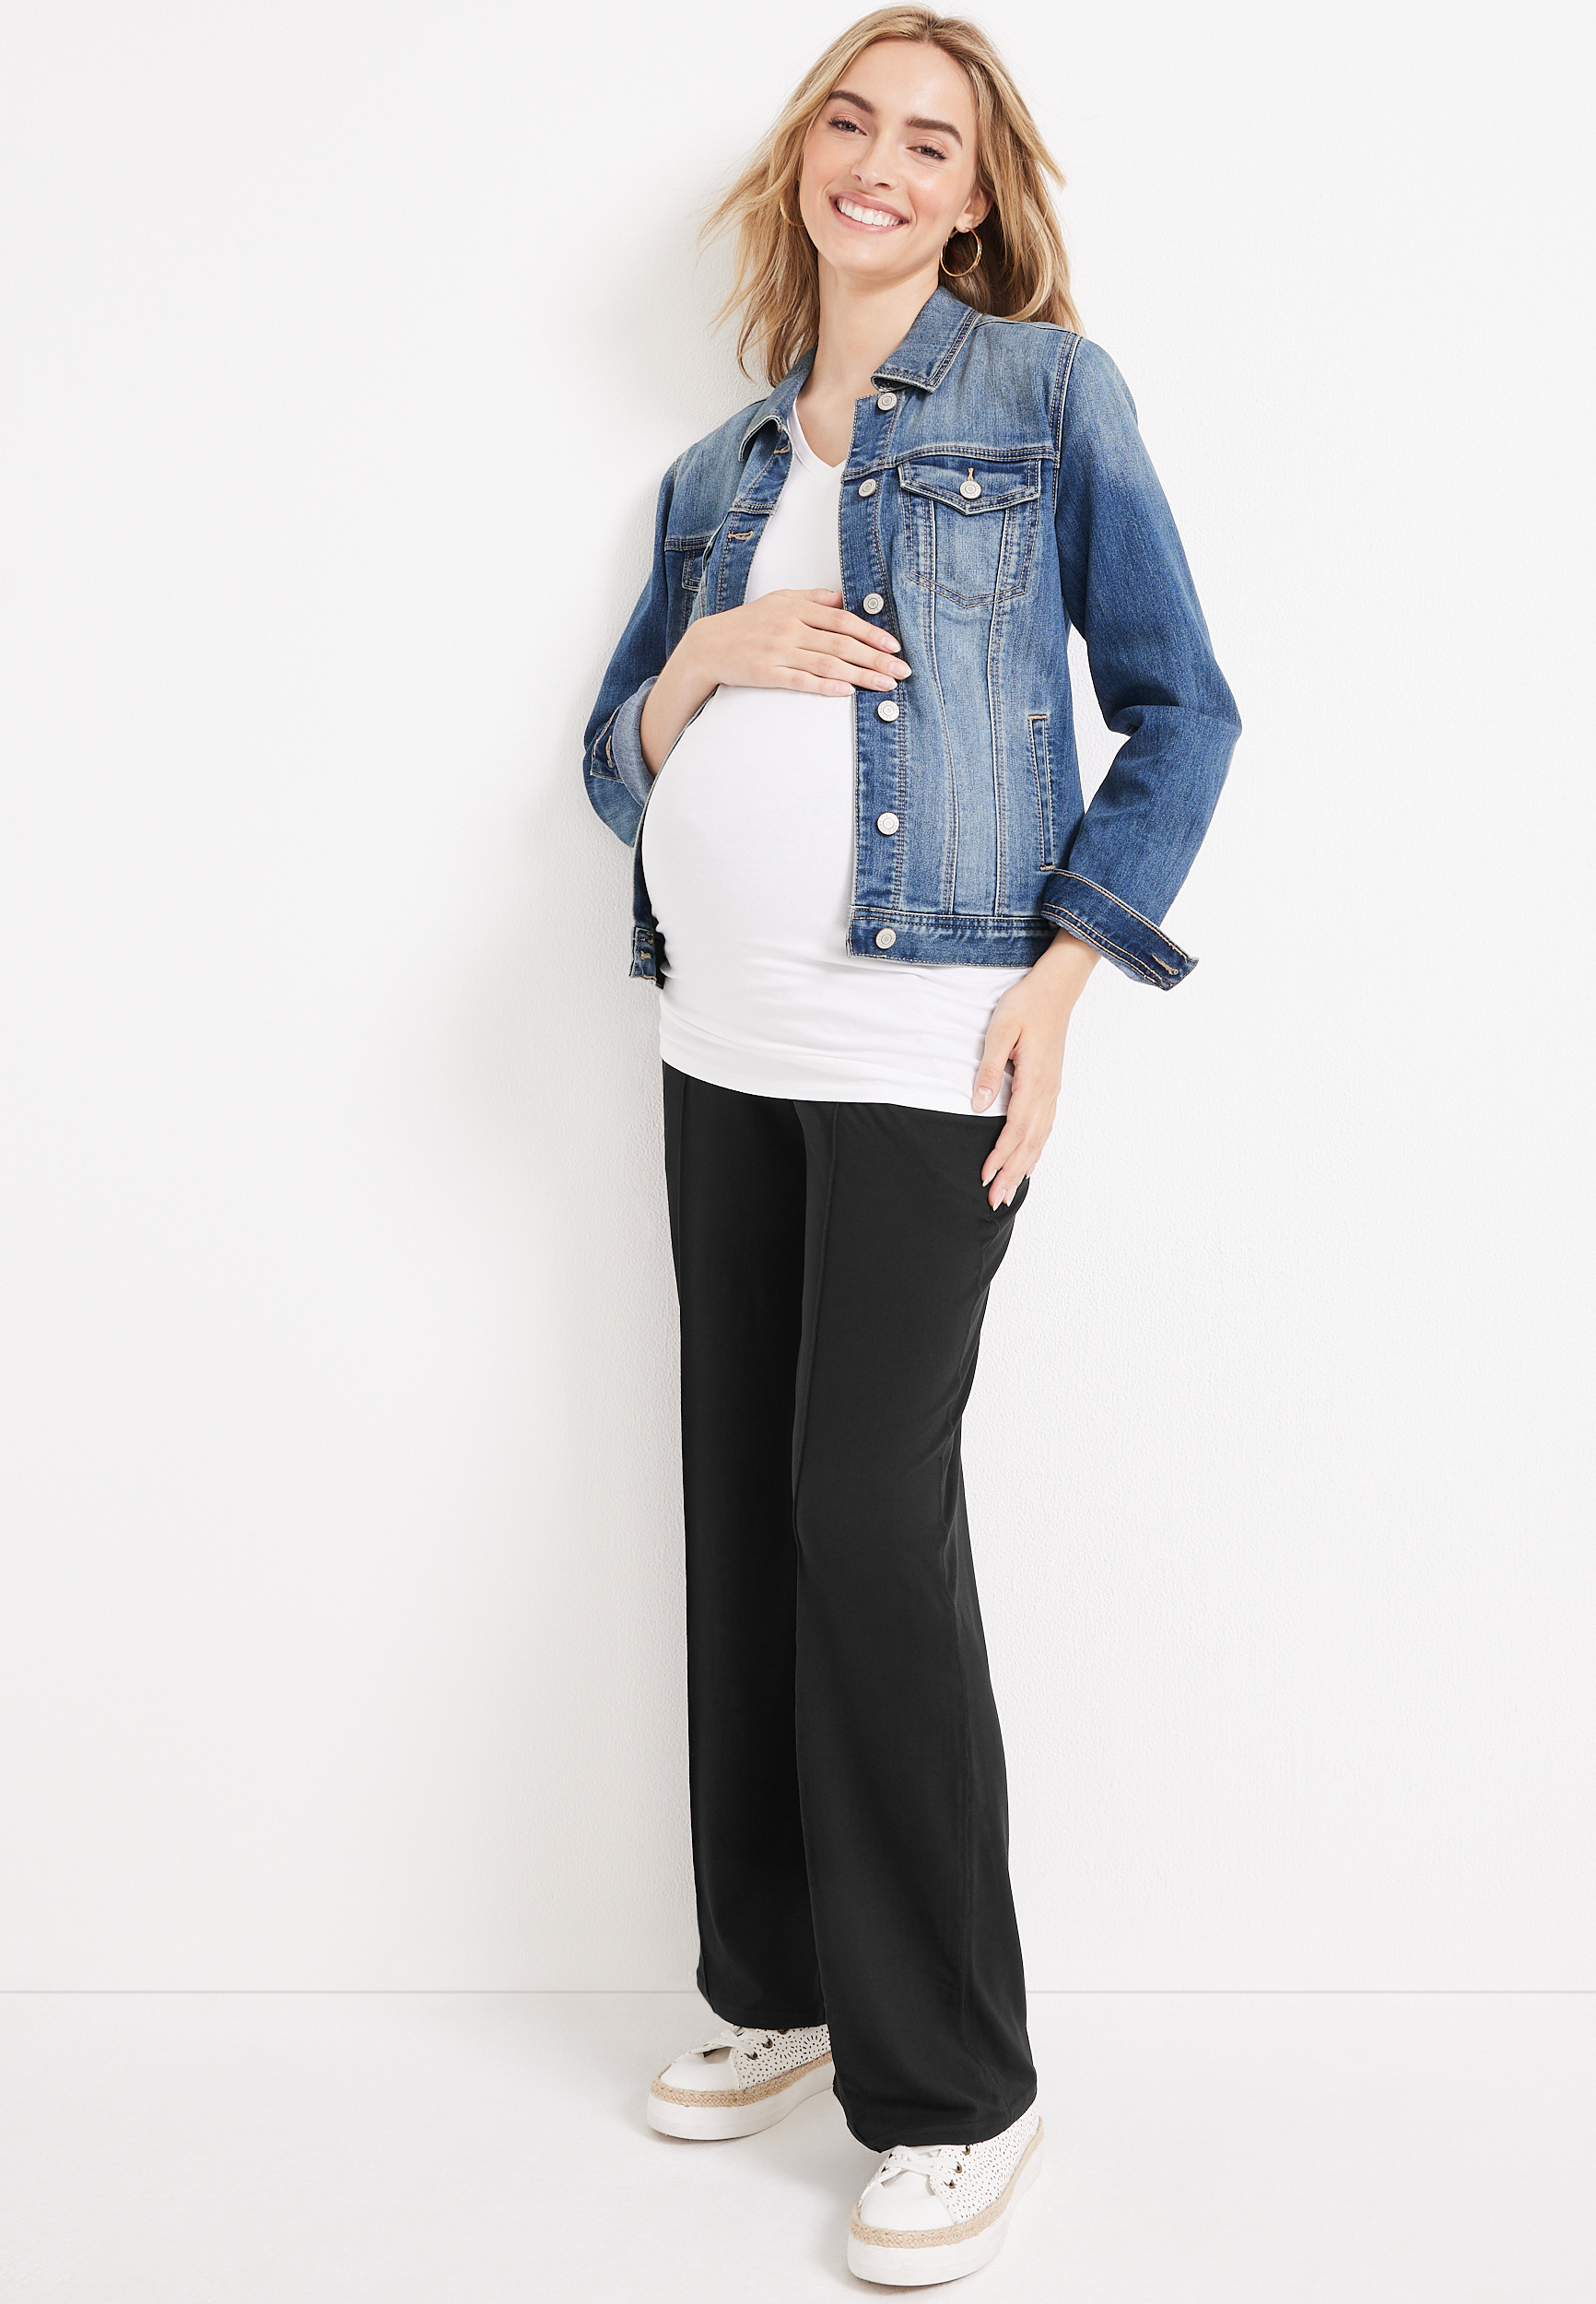 Maternity Jeans - clothing & accessories - by owner - apparel sale -  craigslist